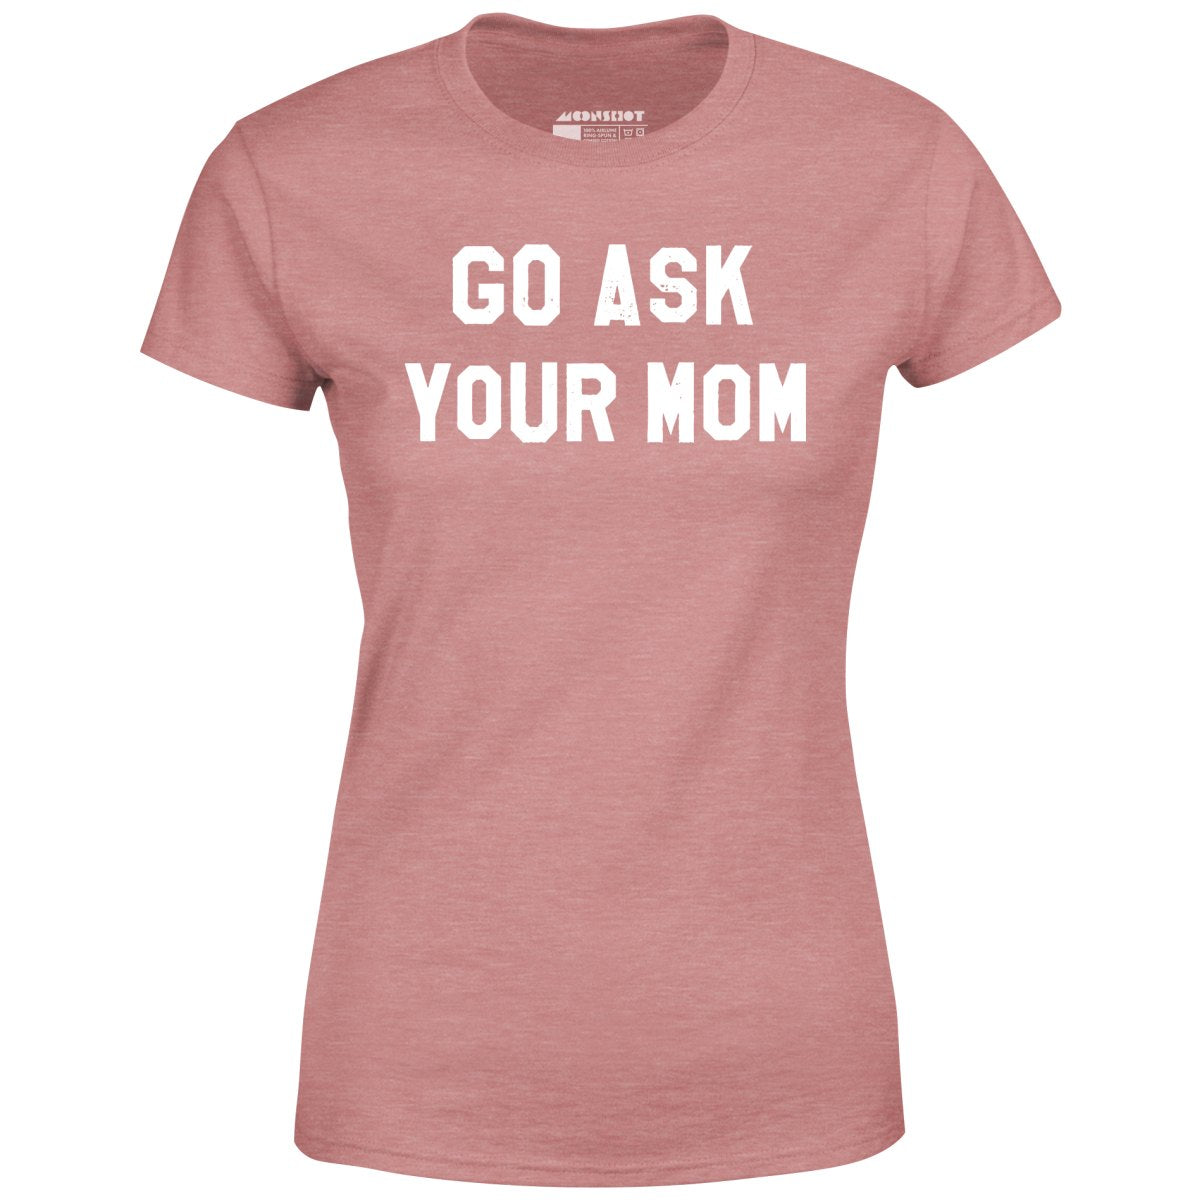 Go Ask Your Mom - Women's T-Shirt